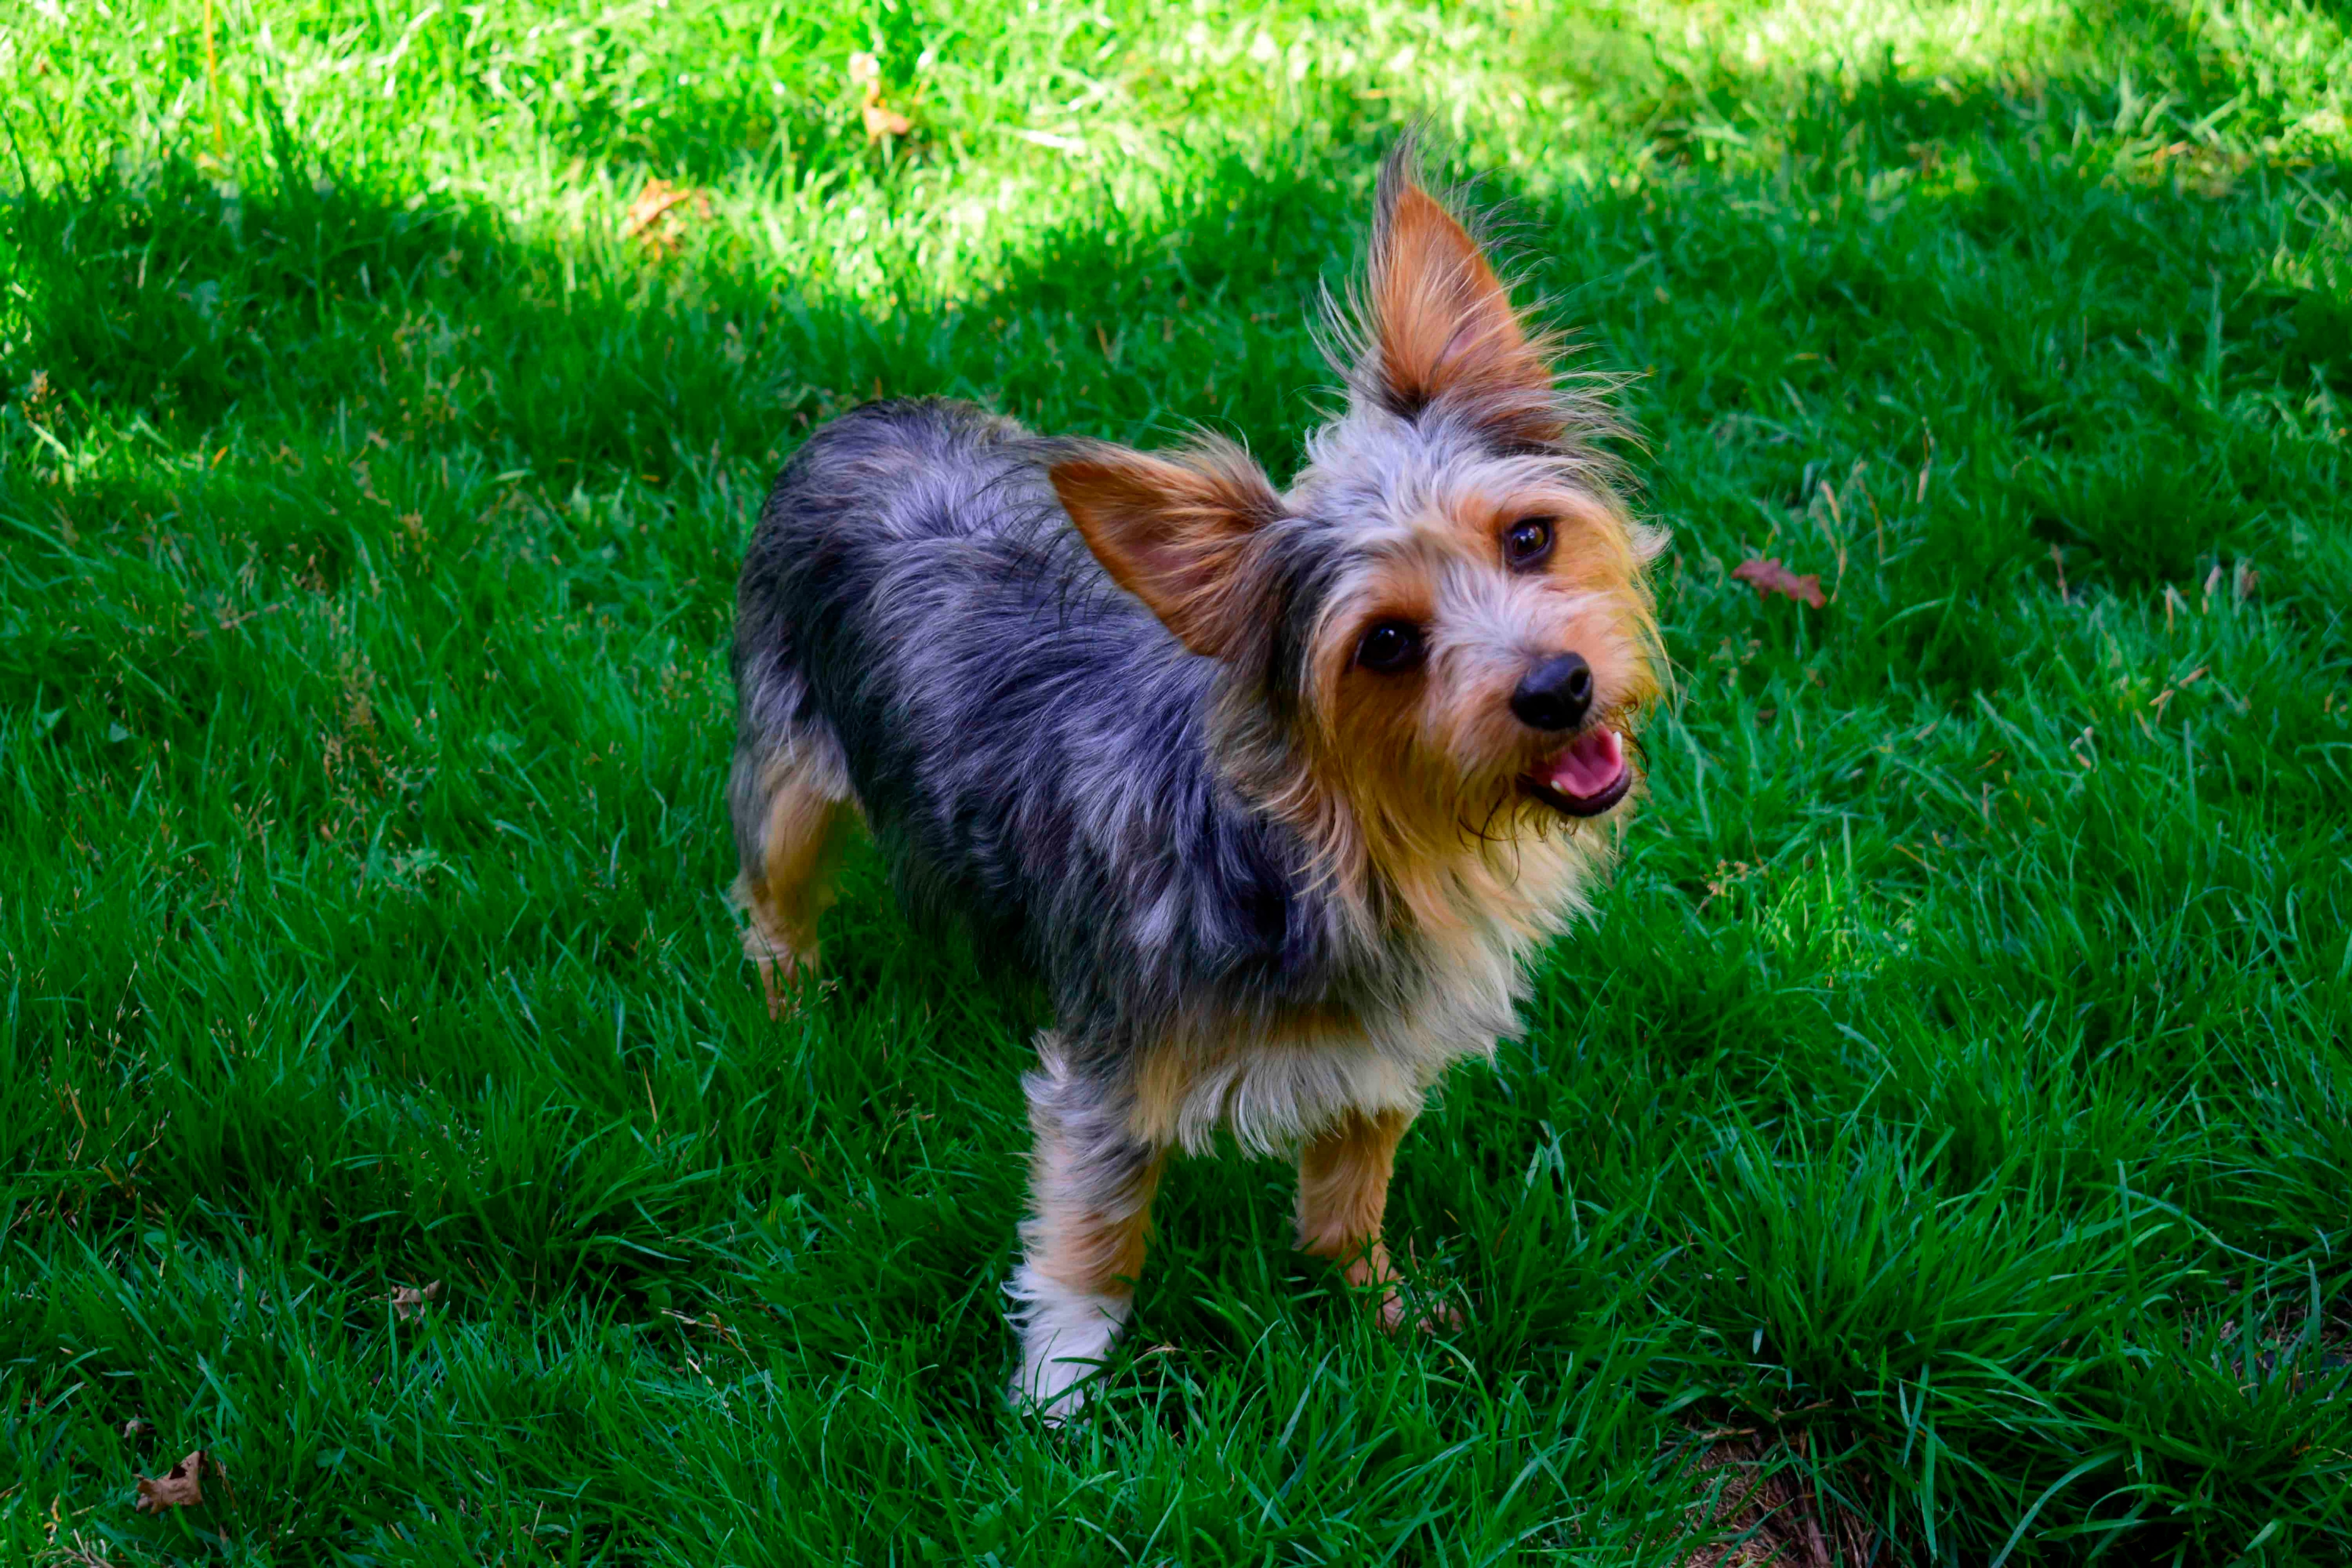 chorkie dog with perked up ears standing in grass with her head tilted